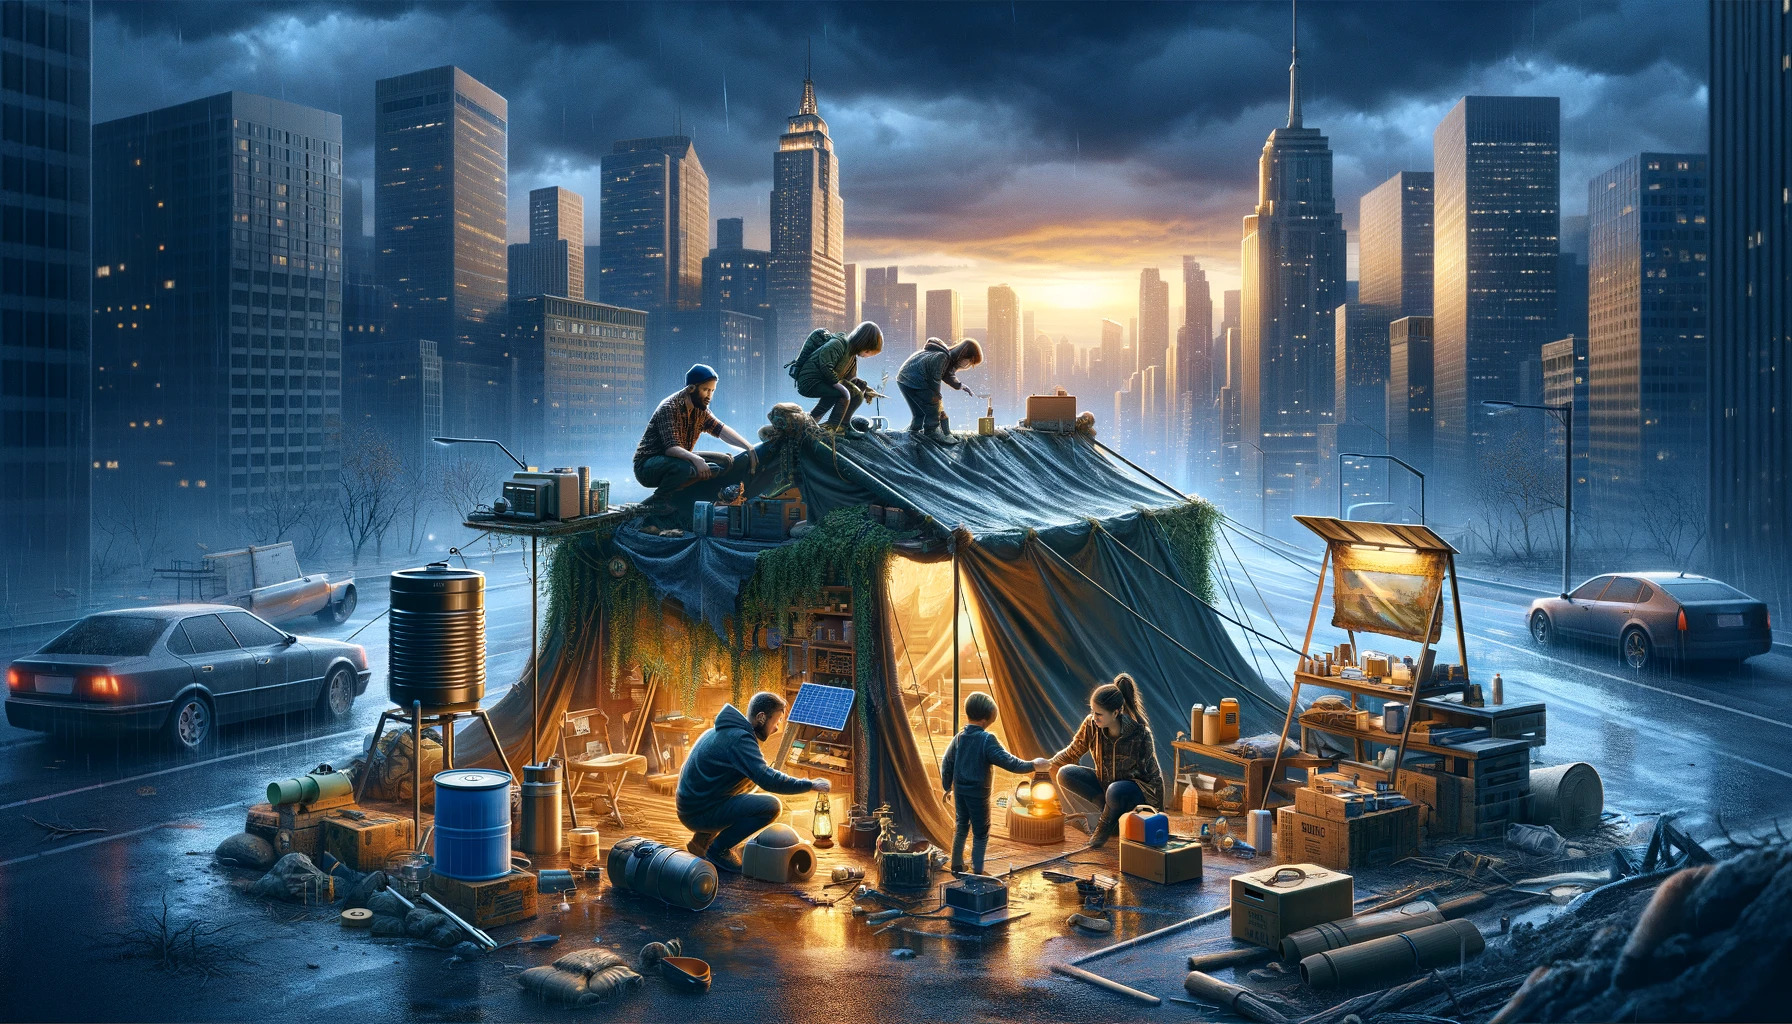 Family setting up a secure urban shelter with a makeshift tent, rainwater collection, solar power setup, and cooking area, highlighting teamwork and adaptability against a city at dusk backdrop, emphasizing survival strategies in urban settings